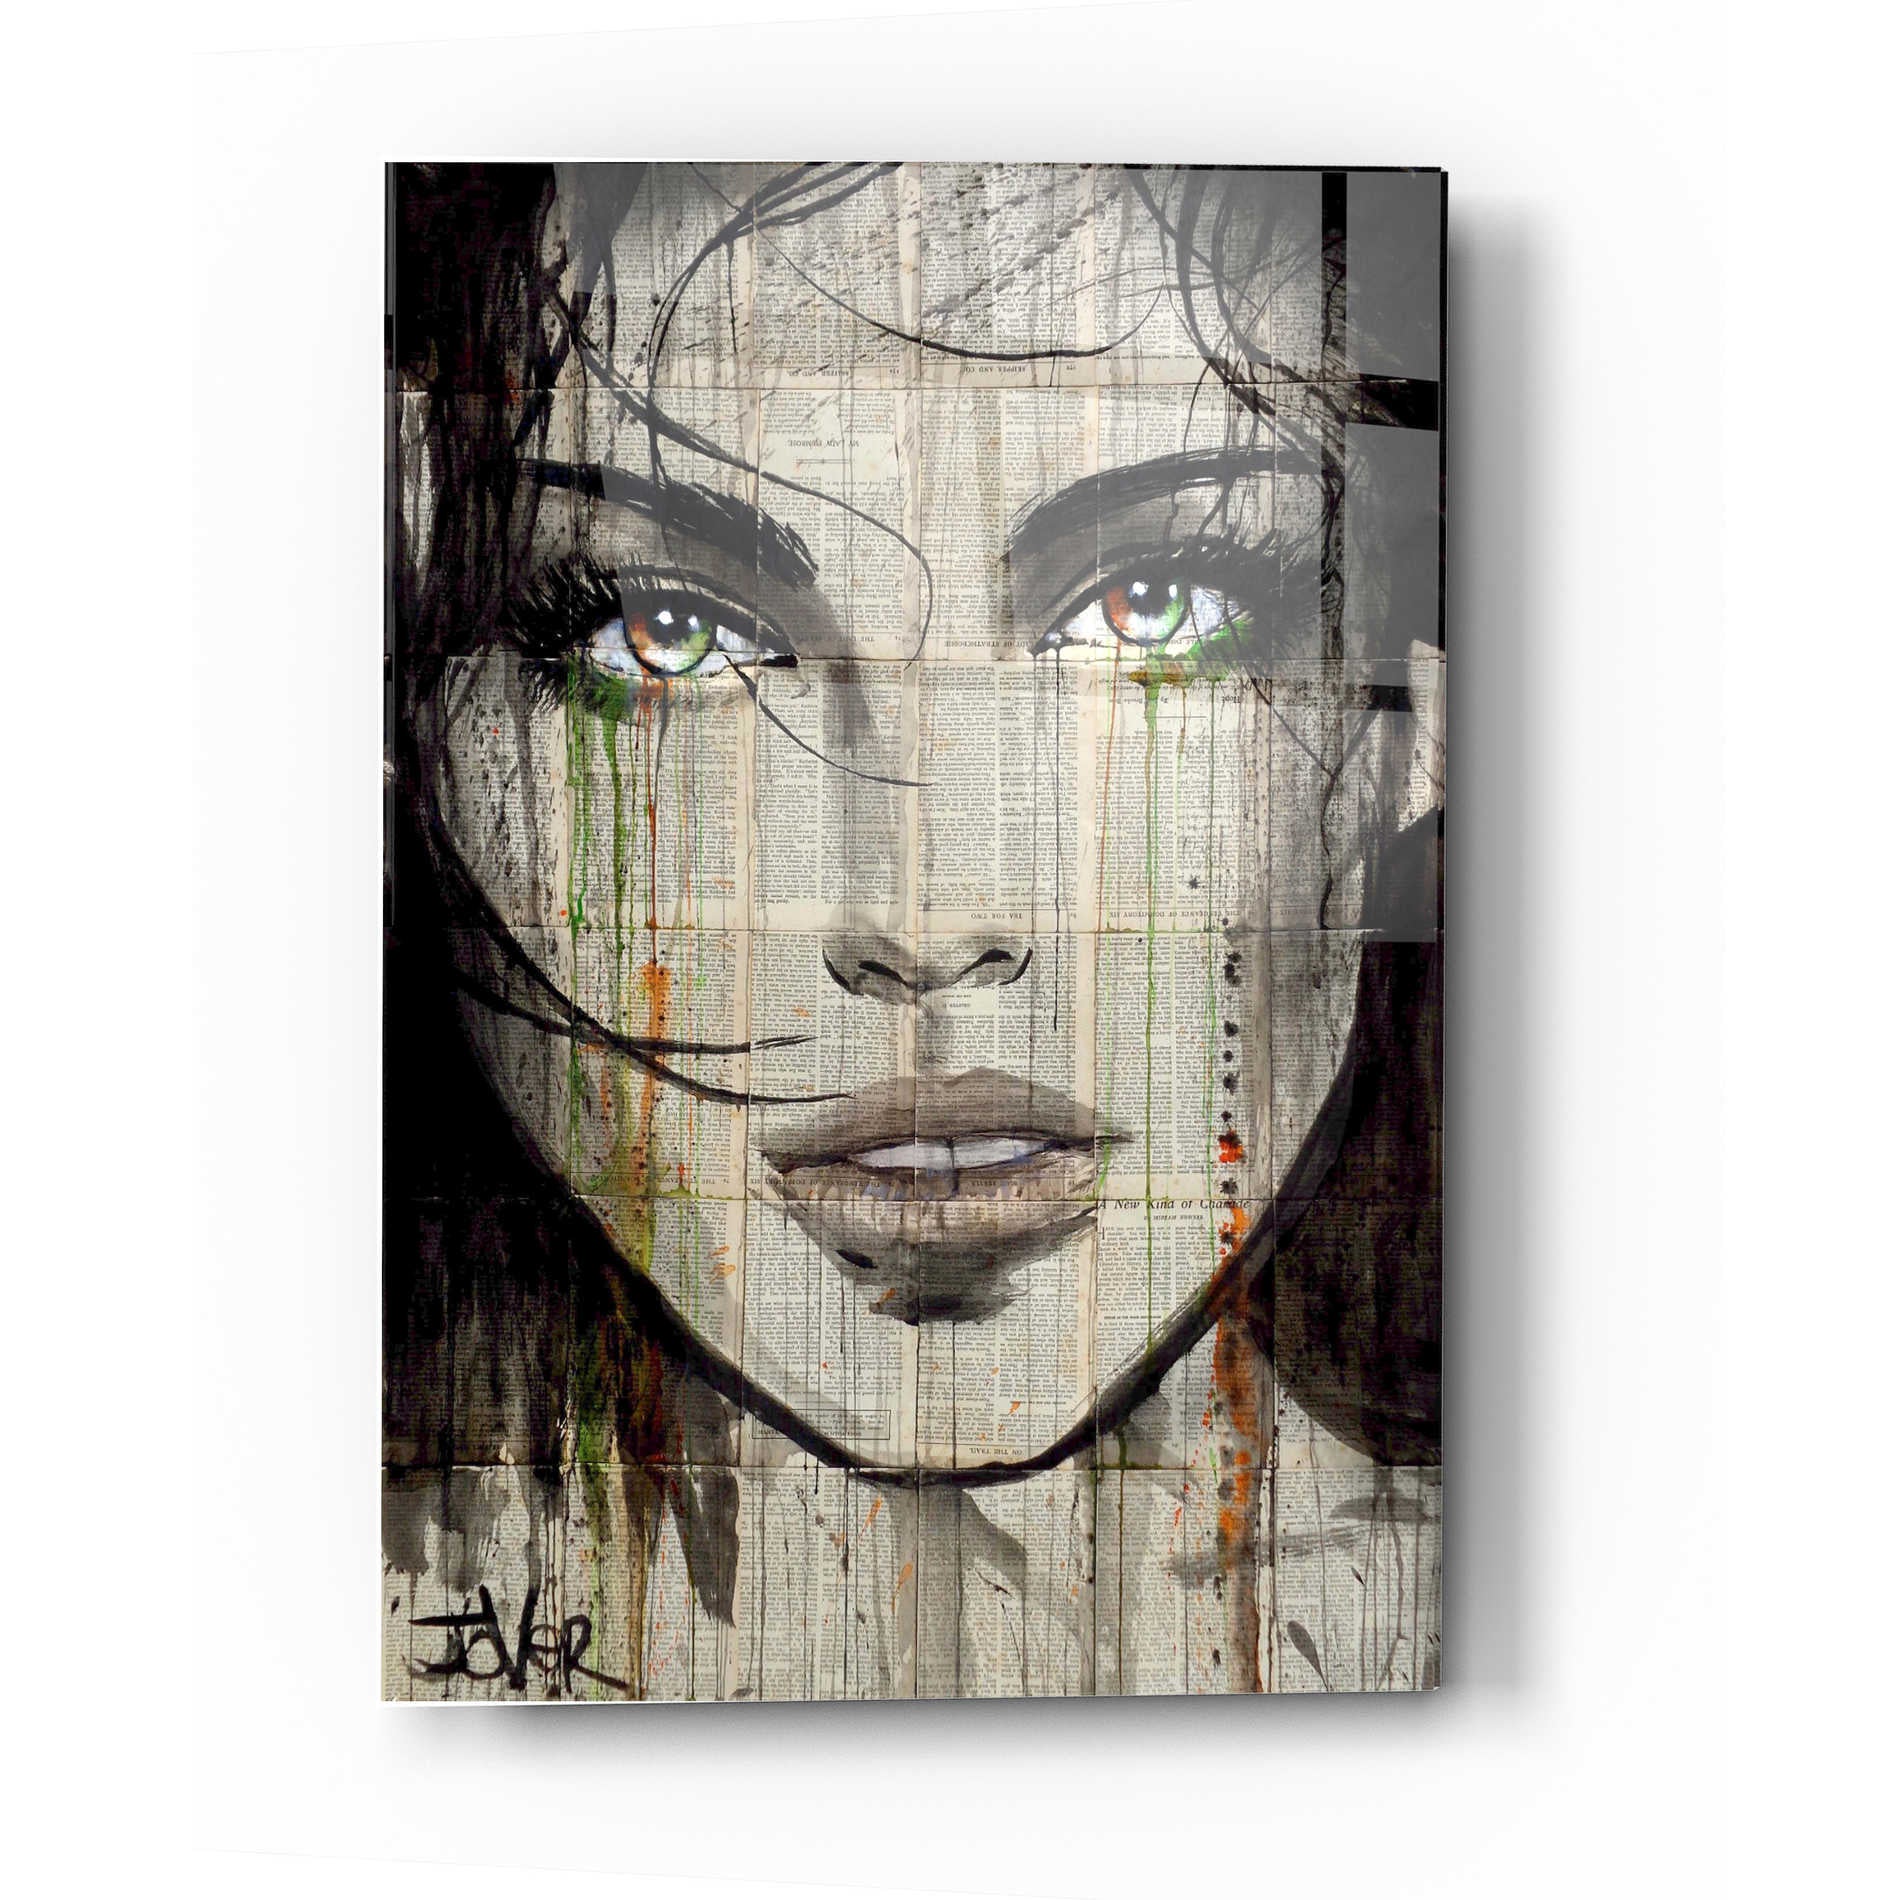 Epic Art 'Another Kind' by Loui Jover, Acrylic Glass Wall Art,24x36